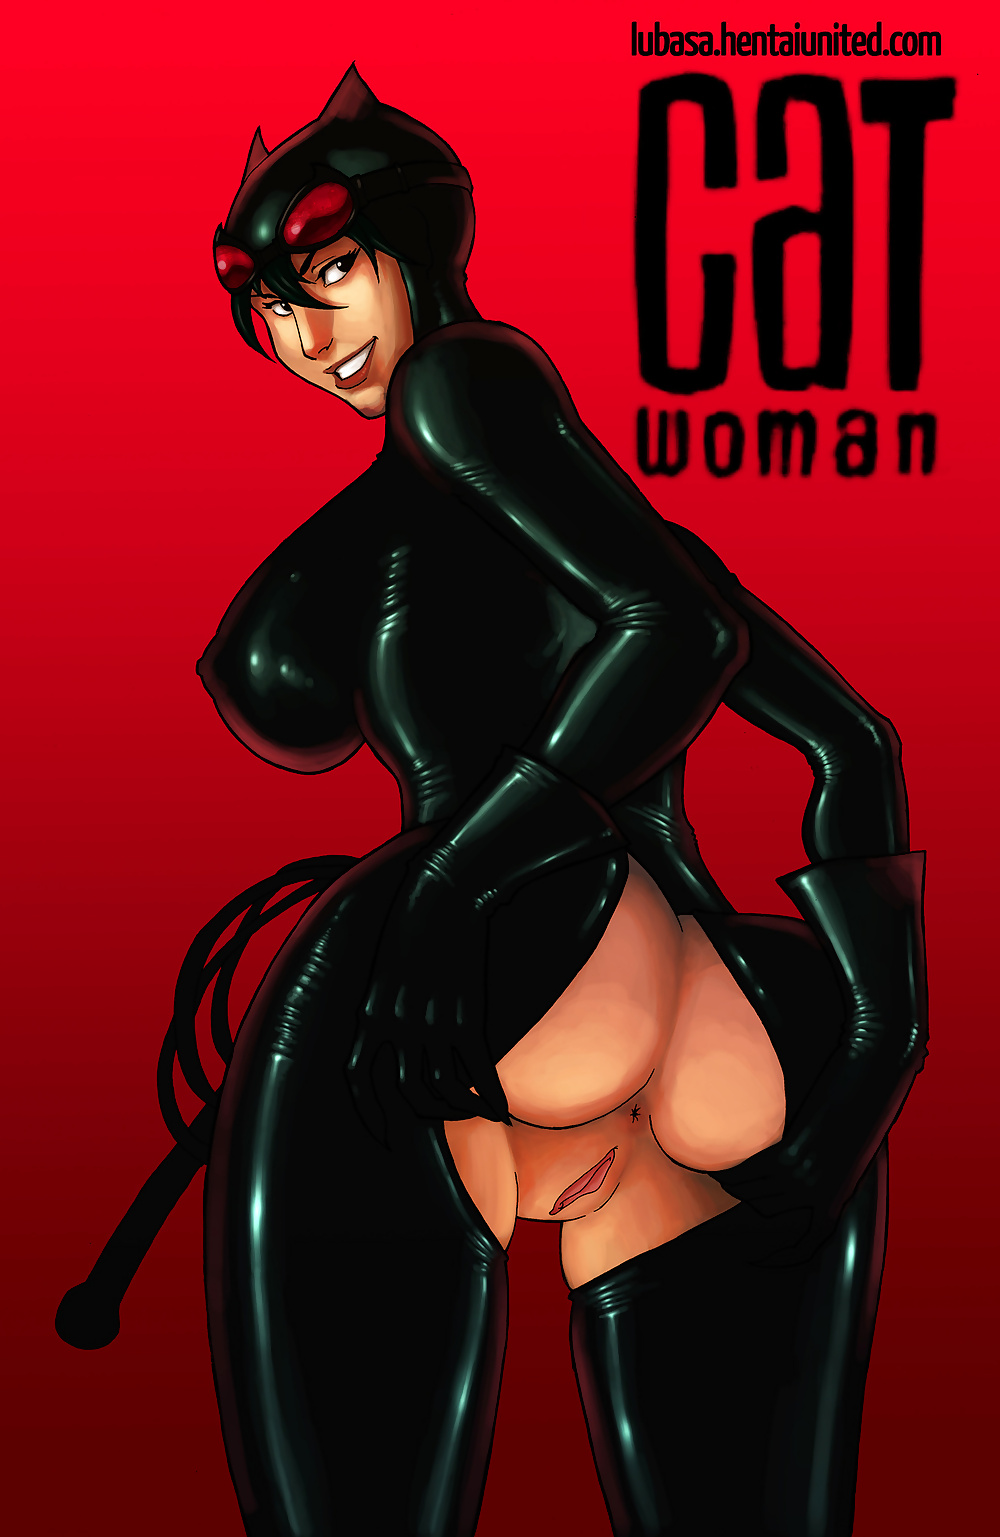 CATWOMAN #28651133